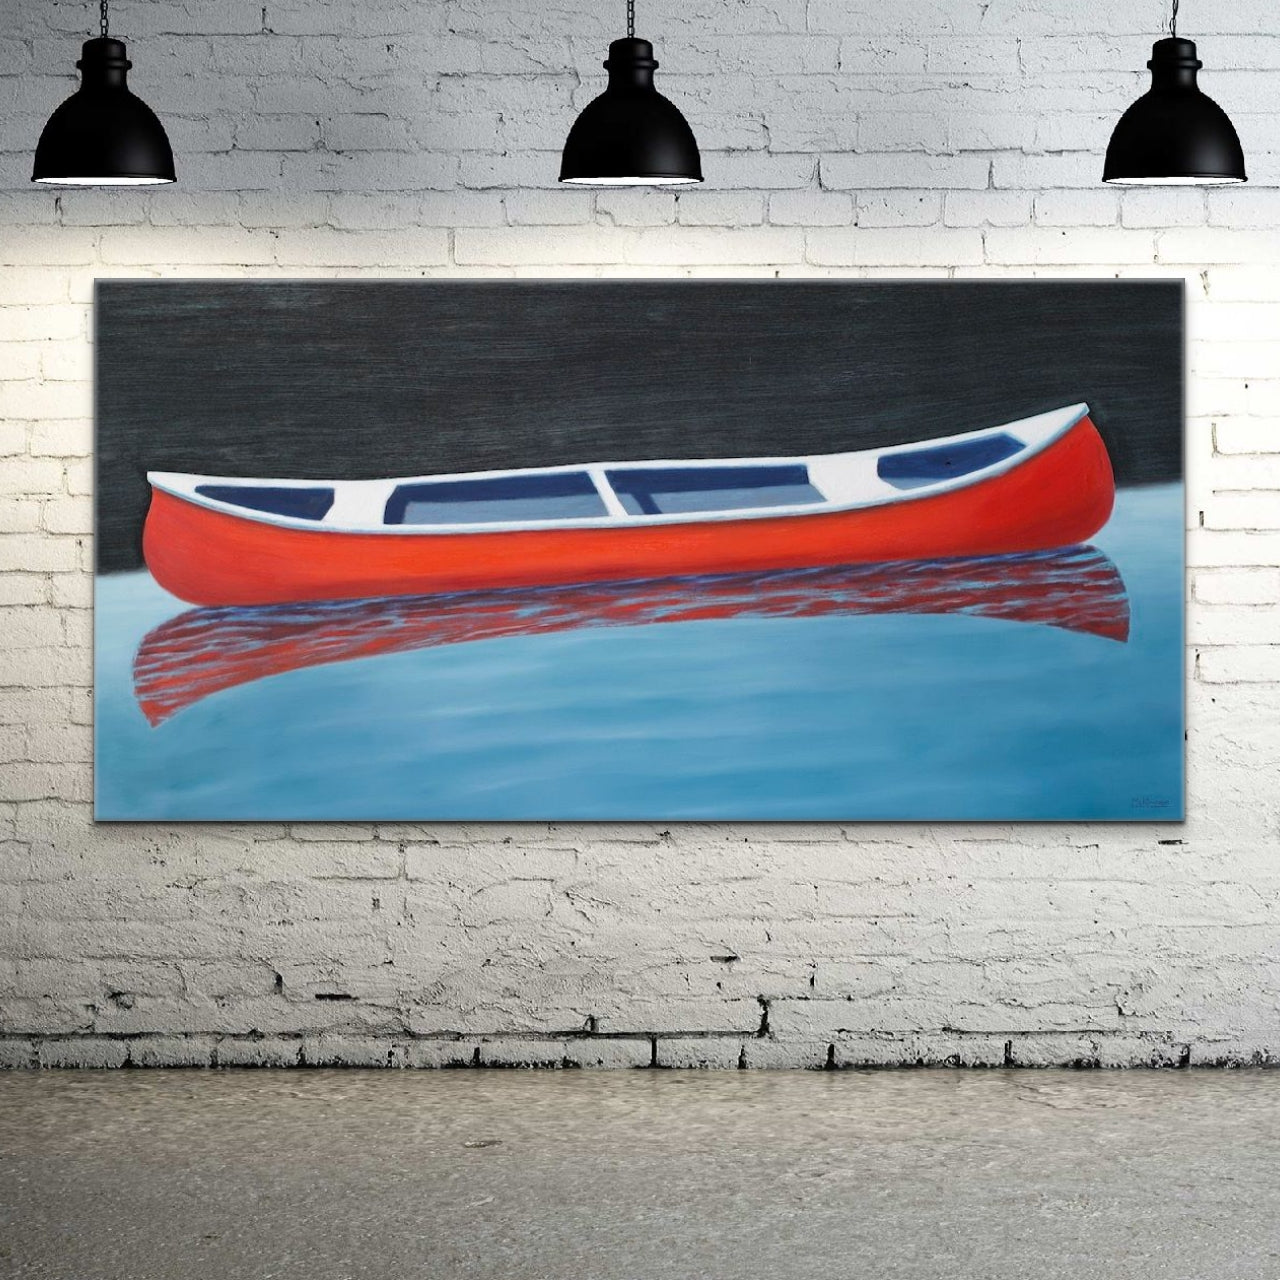 A painting of a red canoe by Canadian artist Catherine McKinnon. The small red boat is floating on almost still blue water in the foreground and the background is pitch black. The giclee print is frameless. It is mounted on a white brick wall below three stylish, contemporary black hanging lights.